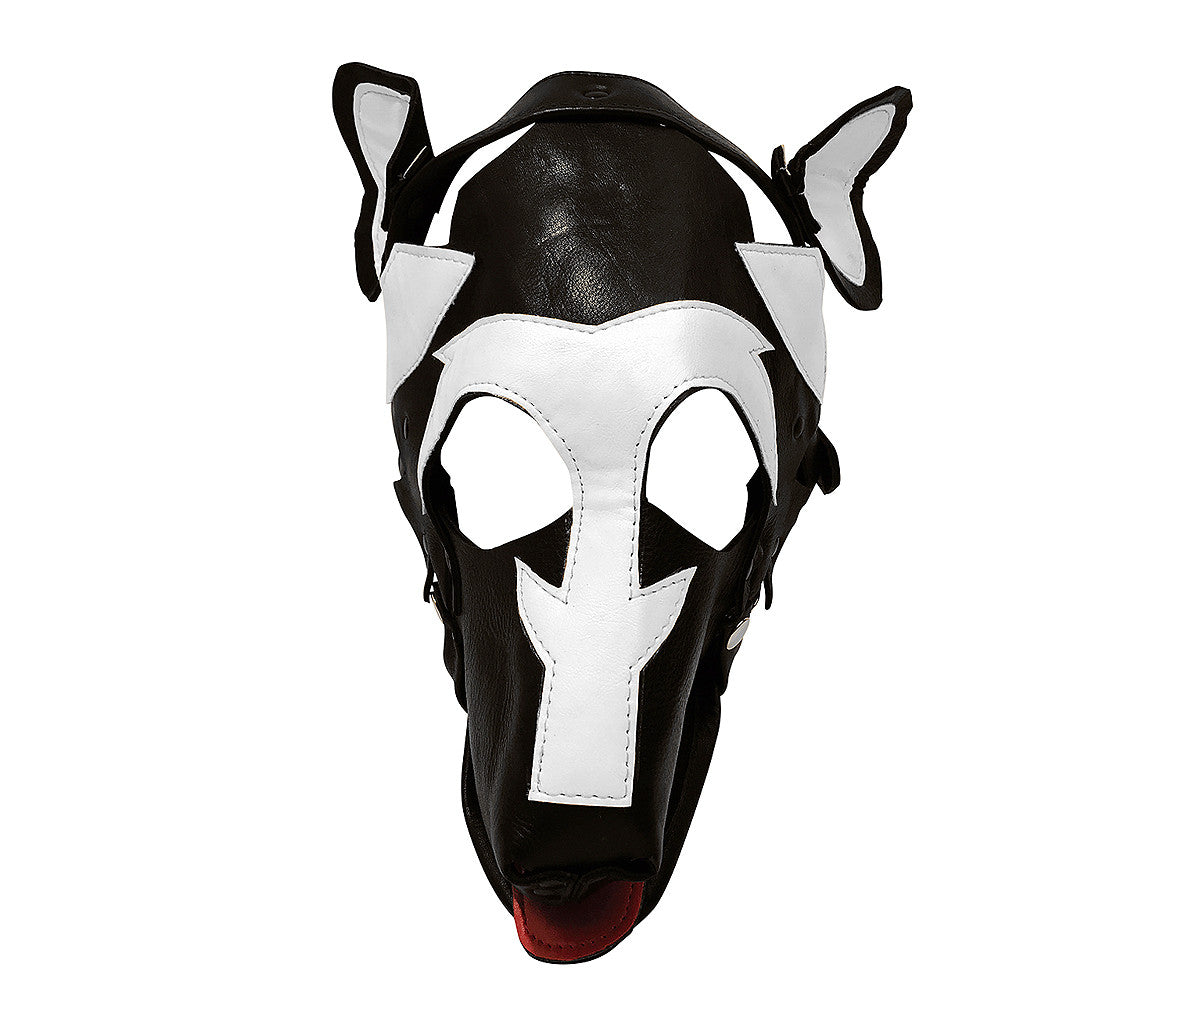 Black & White Leather Puppy Play Dog Mask with Removable Muzzle